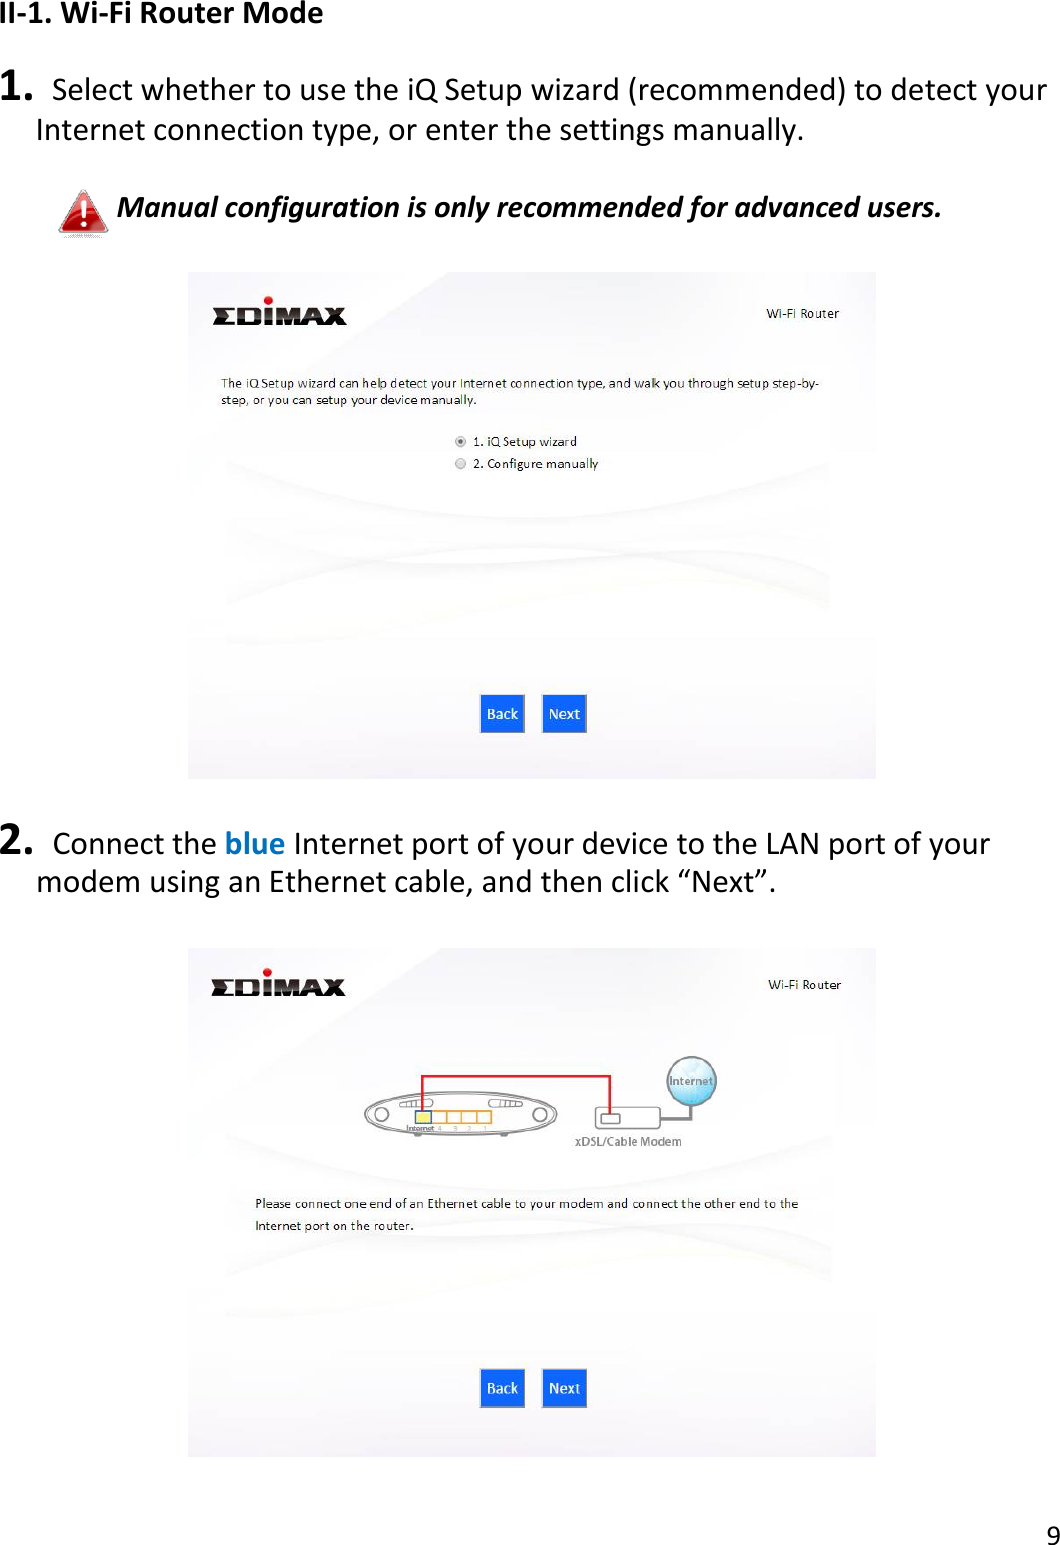 9  II-1. Wi-Fi Router Mode  1.  Select whether to use the iQ Setup wizard (recommended) to detect your Internet connection type, or enter the settings manually.  Manual configuration is only recommended for advanced users.    2.   Connect the blue Internet port of your device to the LAN port of your modem using an Ethernet cable, and then click “Next”.    